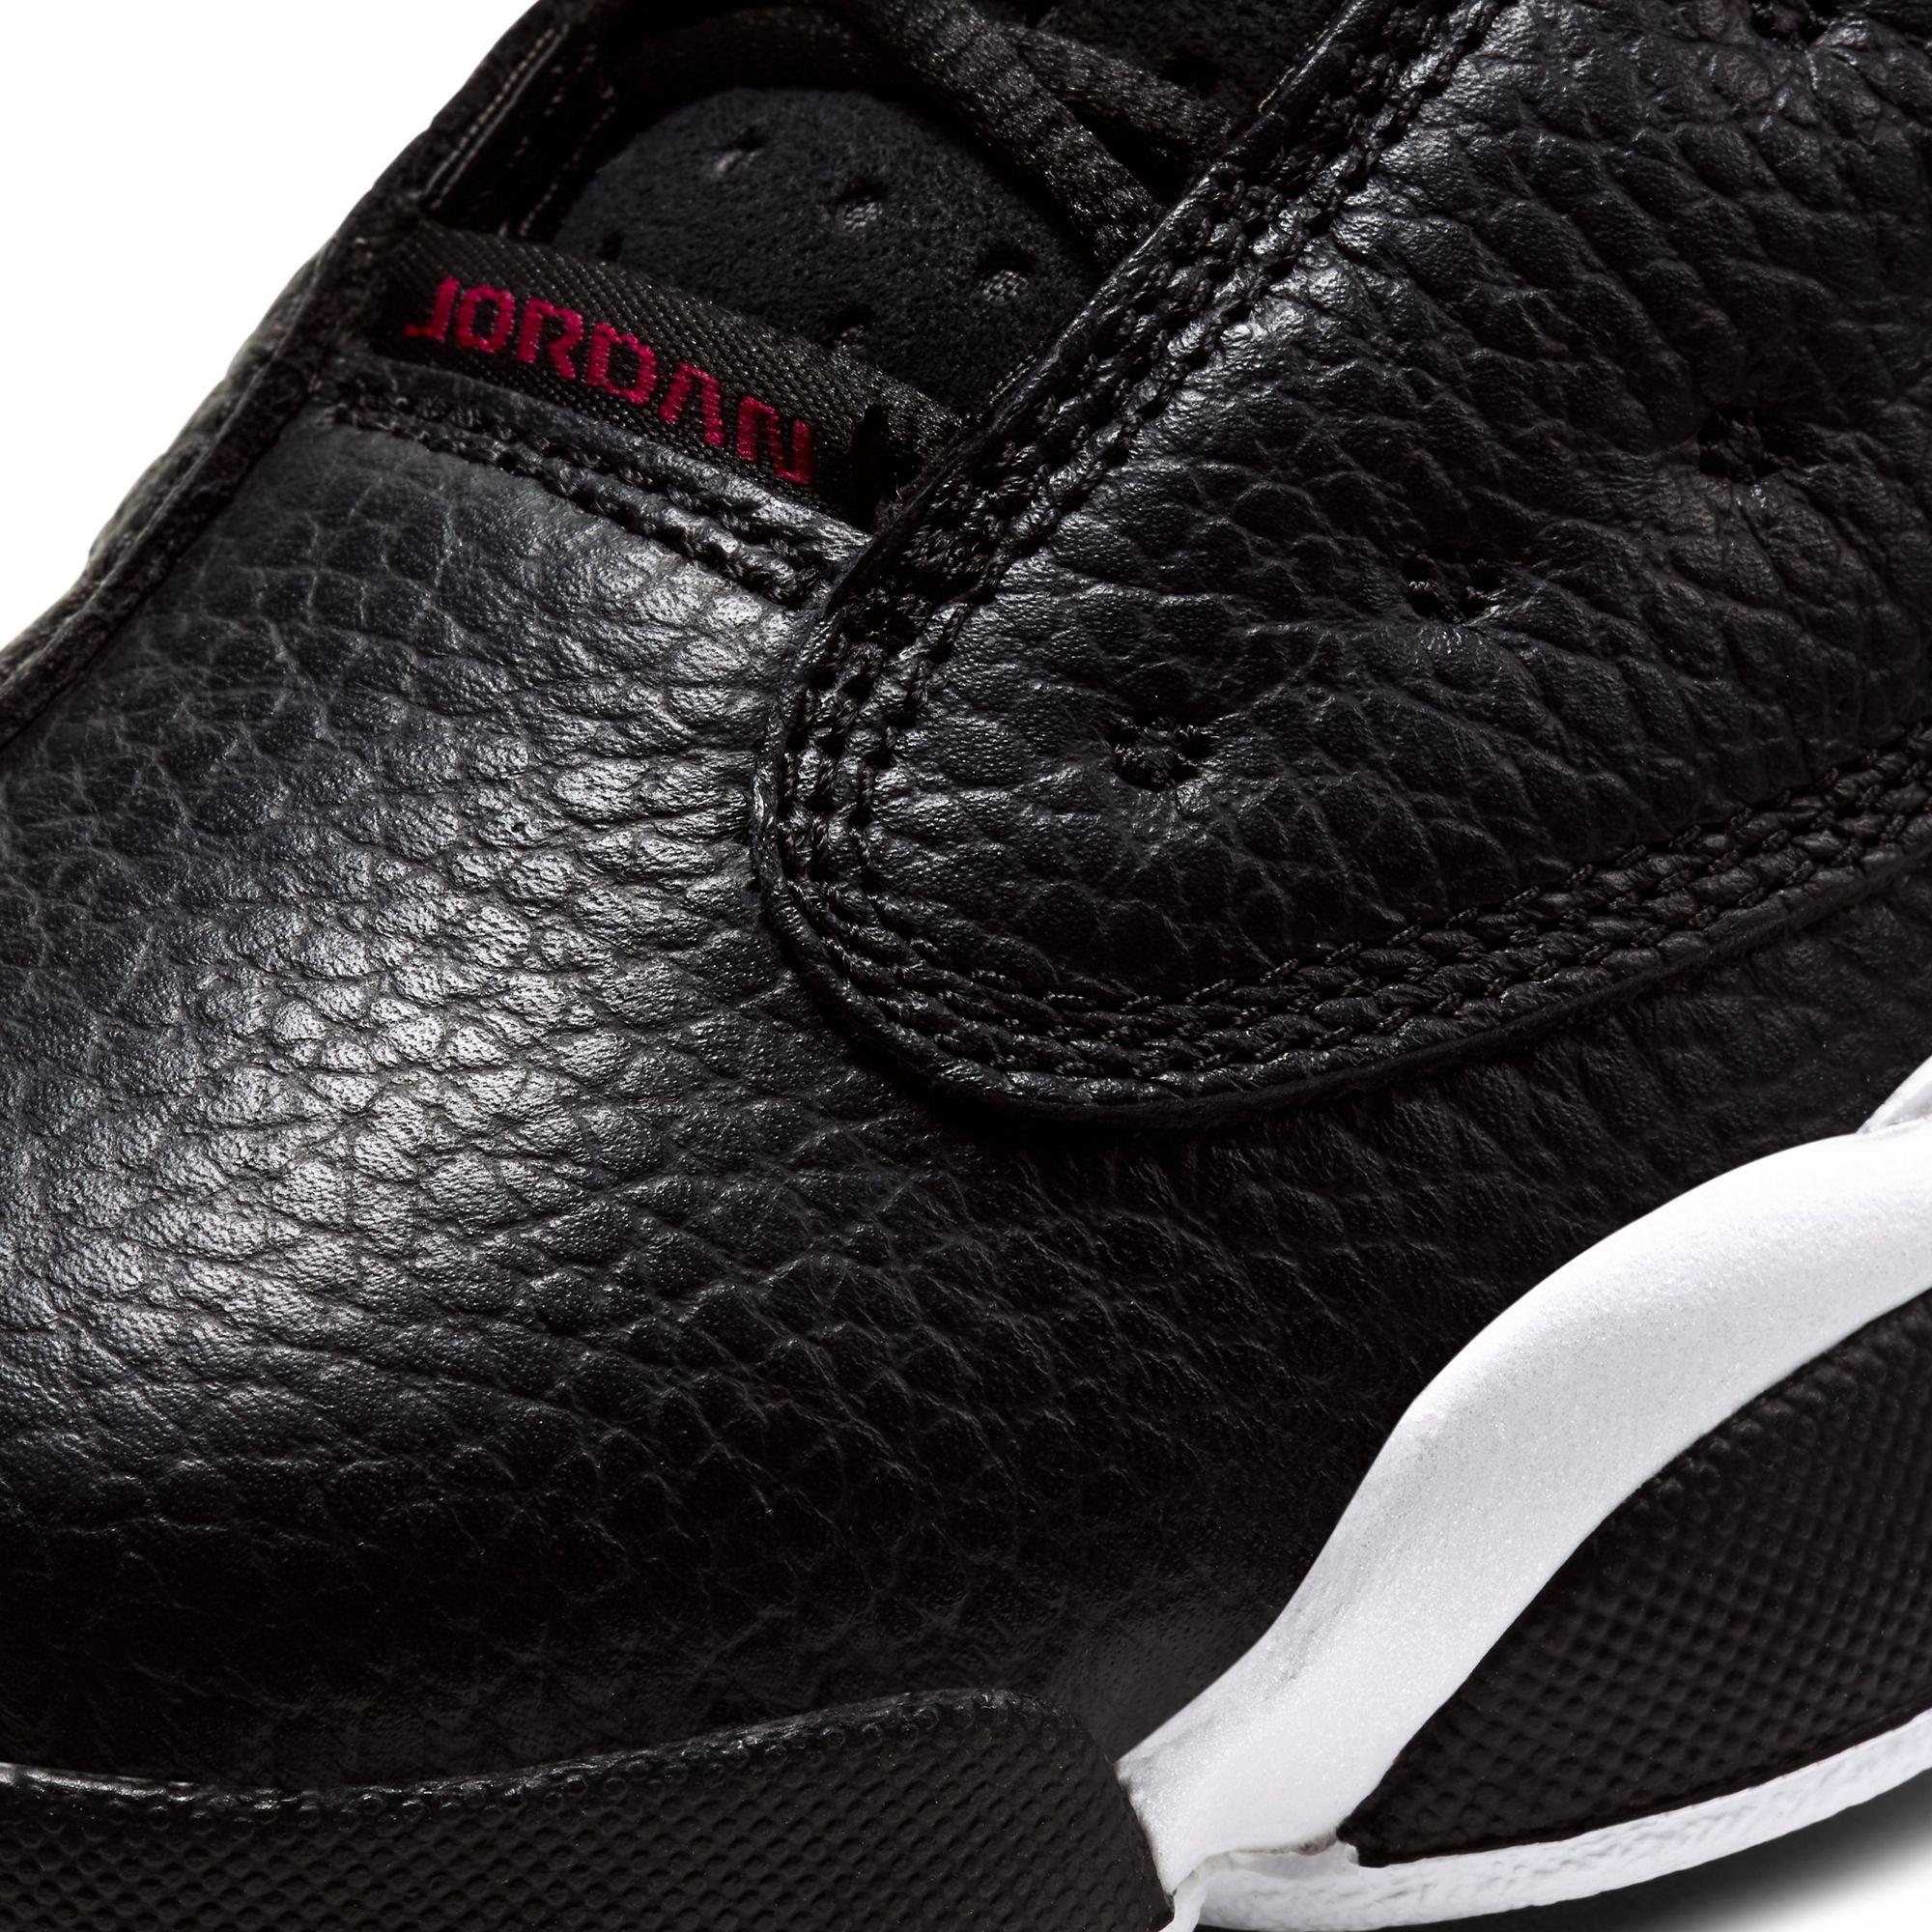 Here's What The Air Jordan 13 Black/Gym Red Looks Like On-Foot •